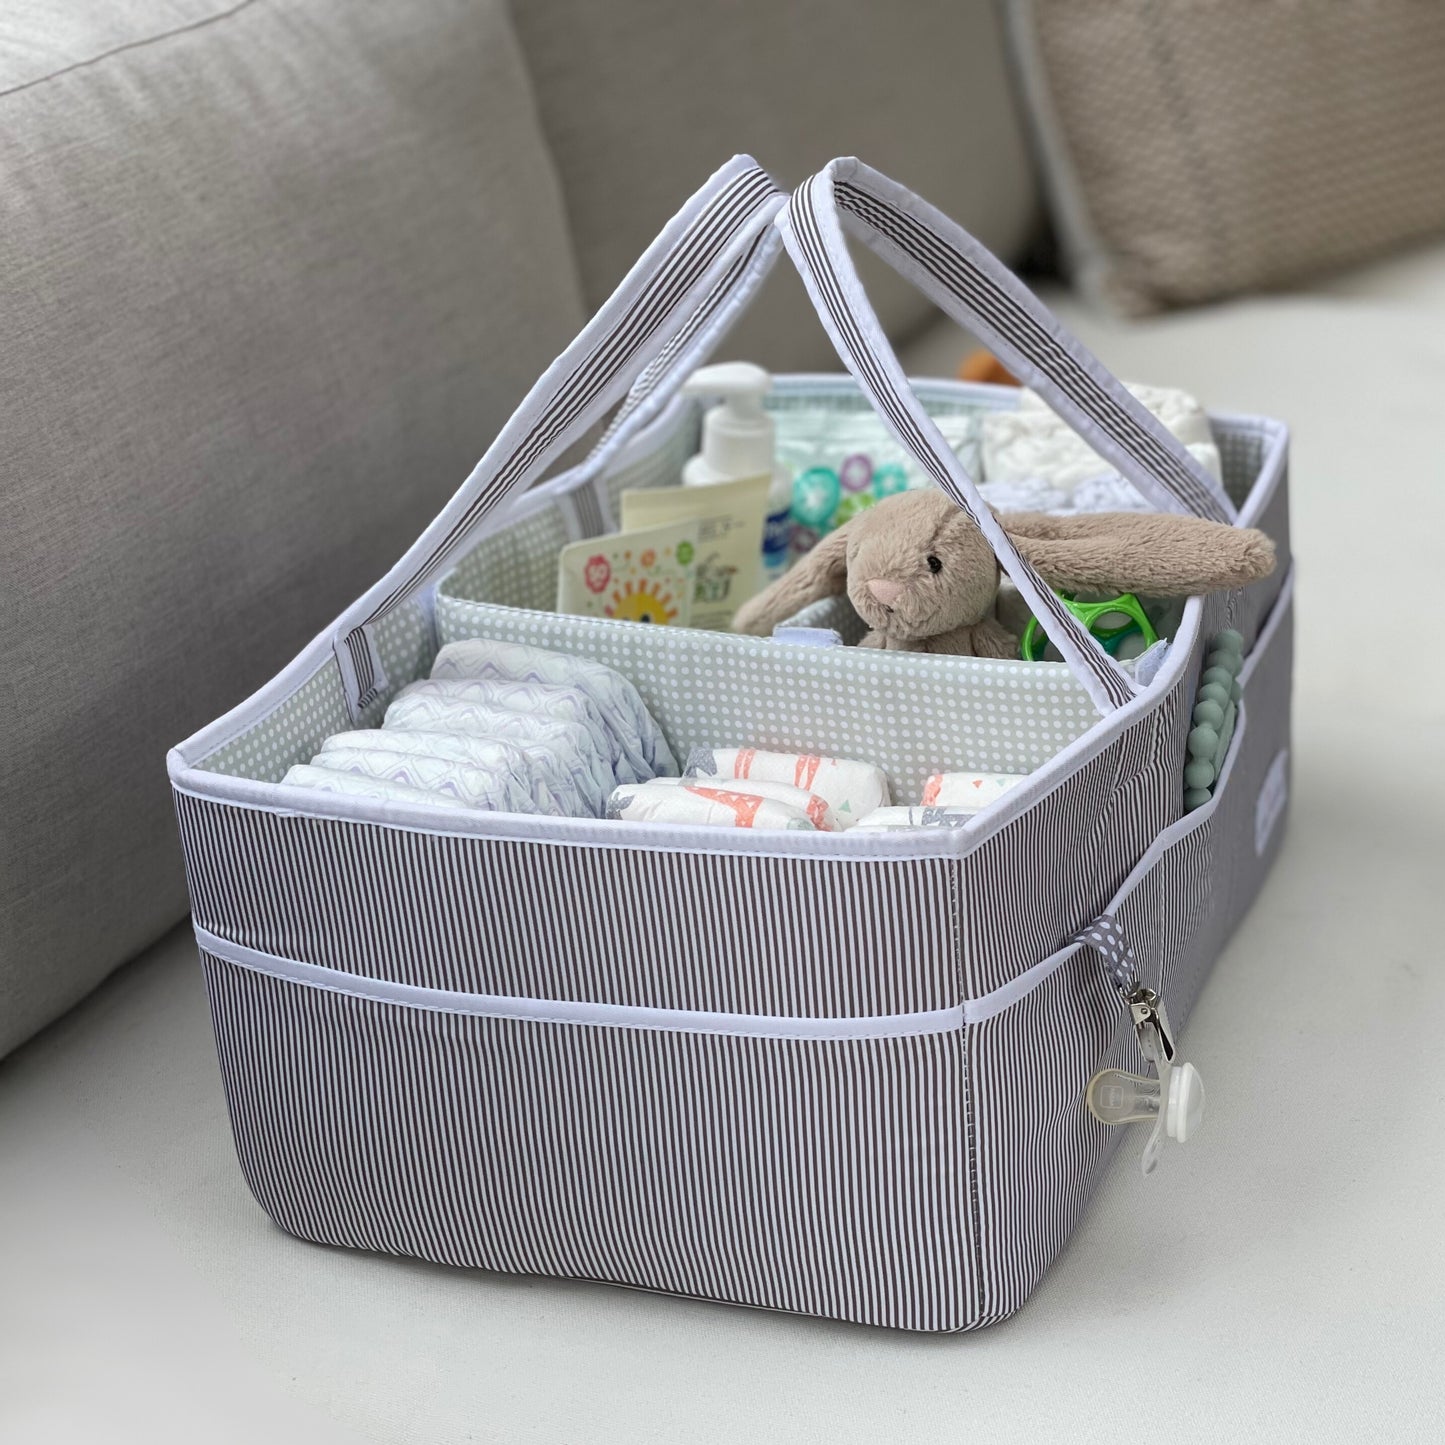 Extra Large Diaper Caddy - Gray/Mint